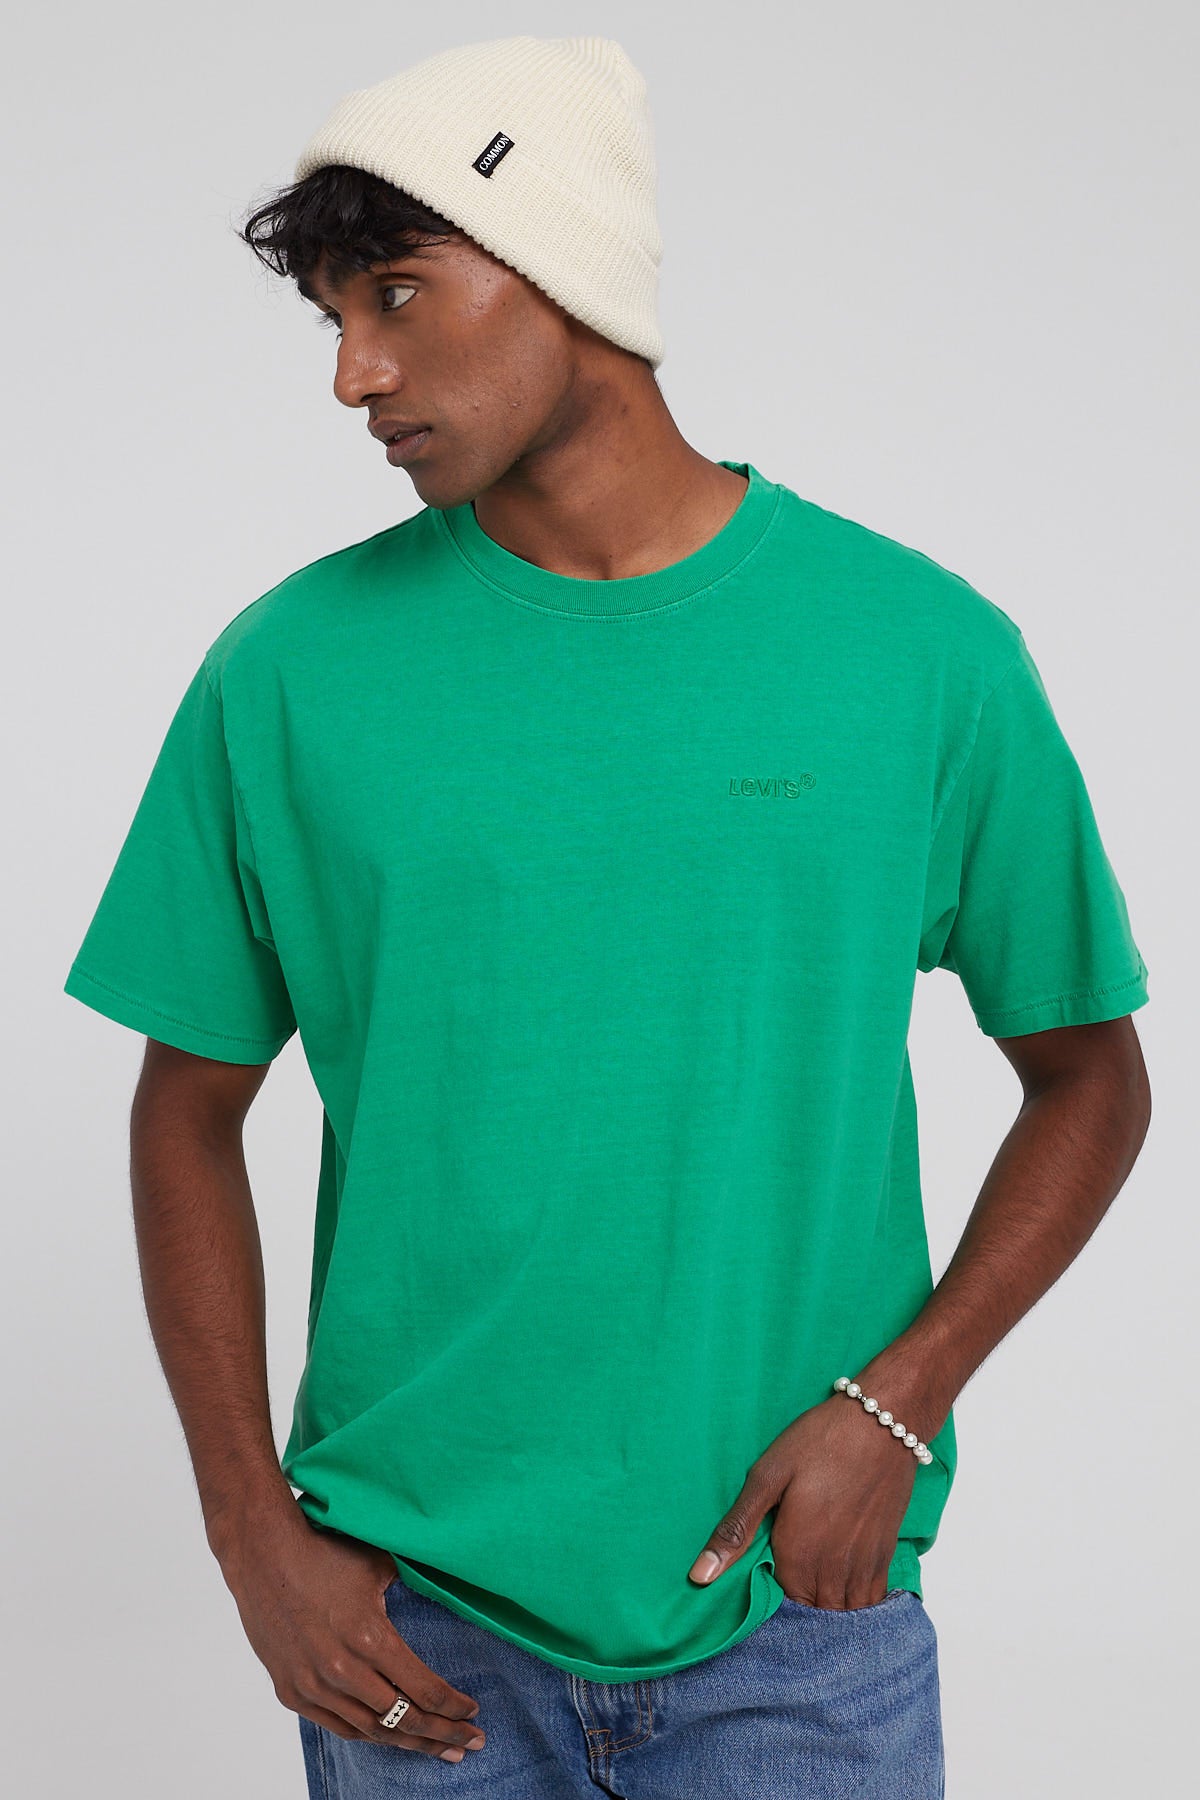 Champion Red Tab Vintage Tee Jelly Been Green